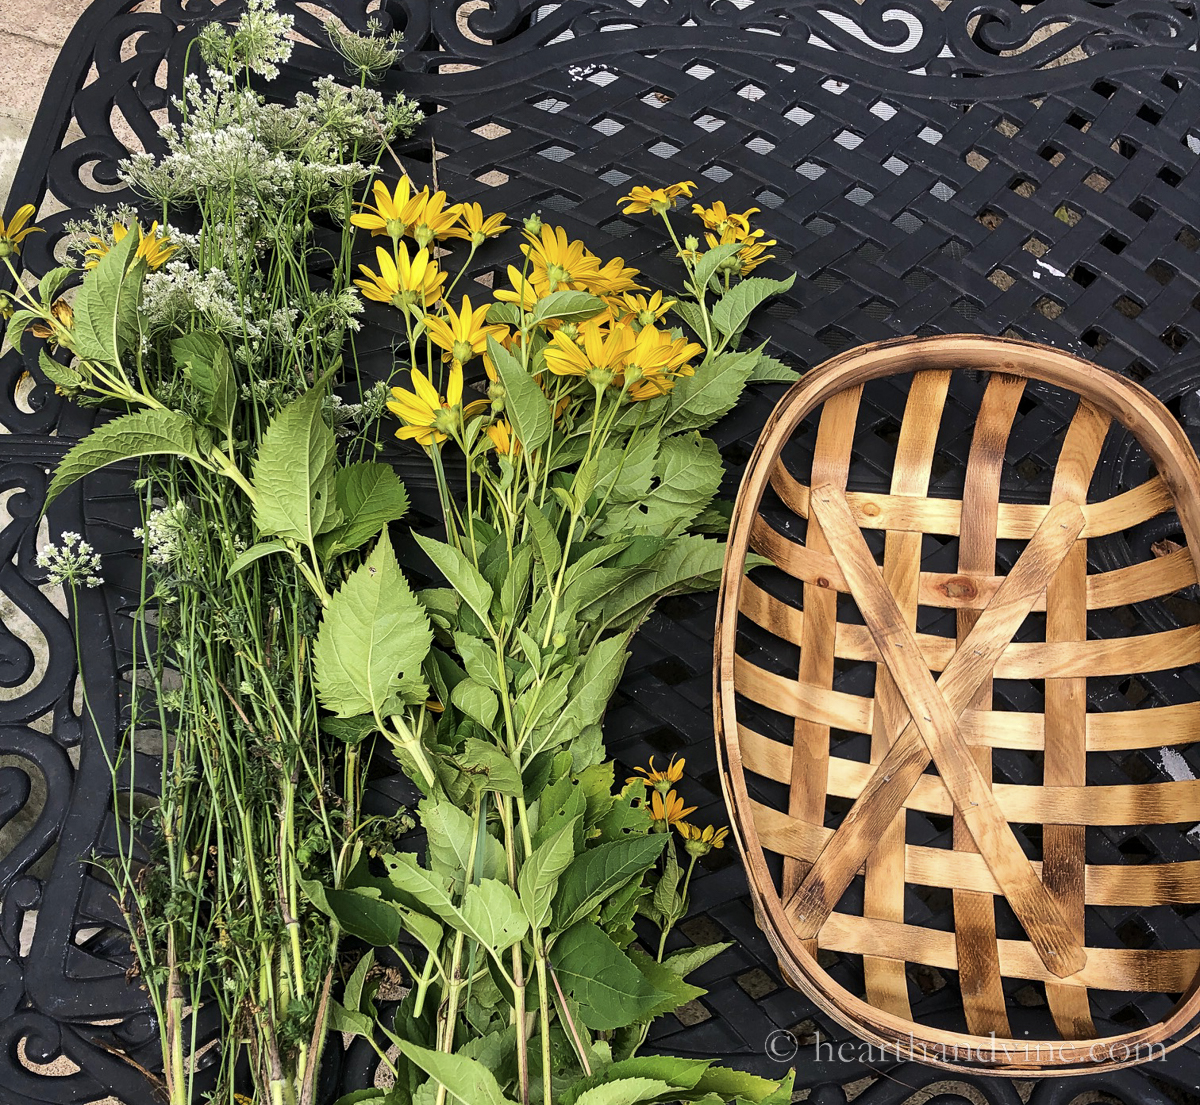 Tobacco basket next to wild sunflowers and queen anne's lace flowers on a table.